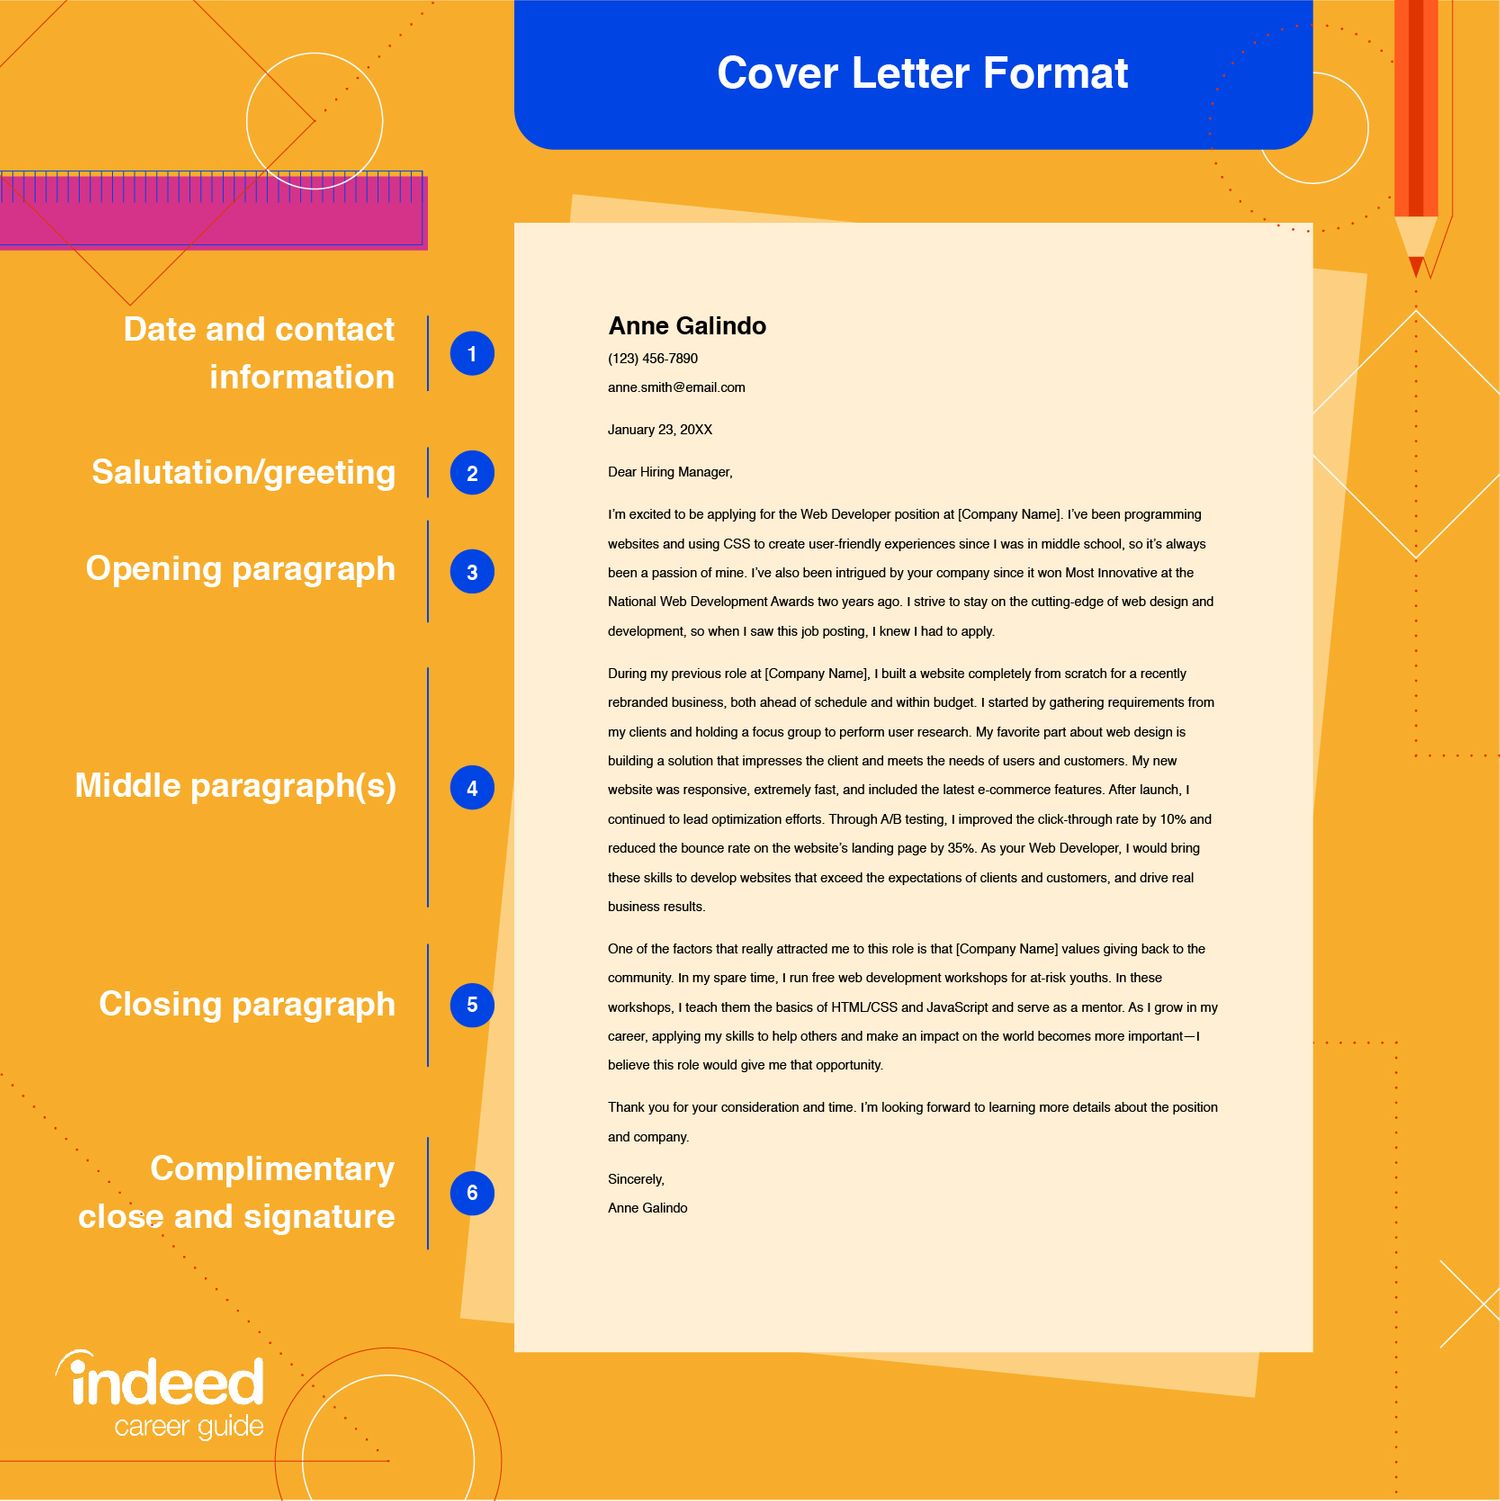 Different parts of a cover letter